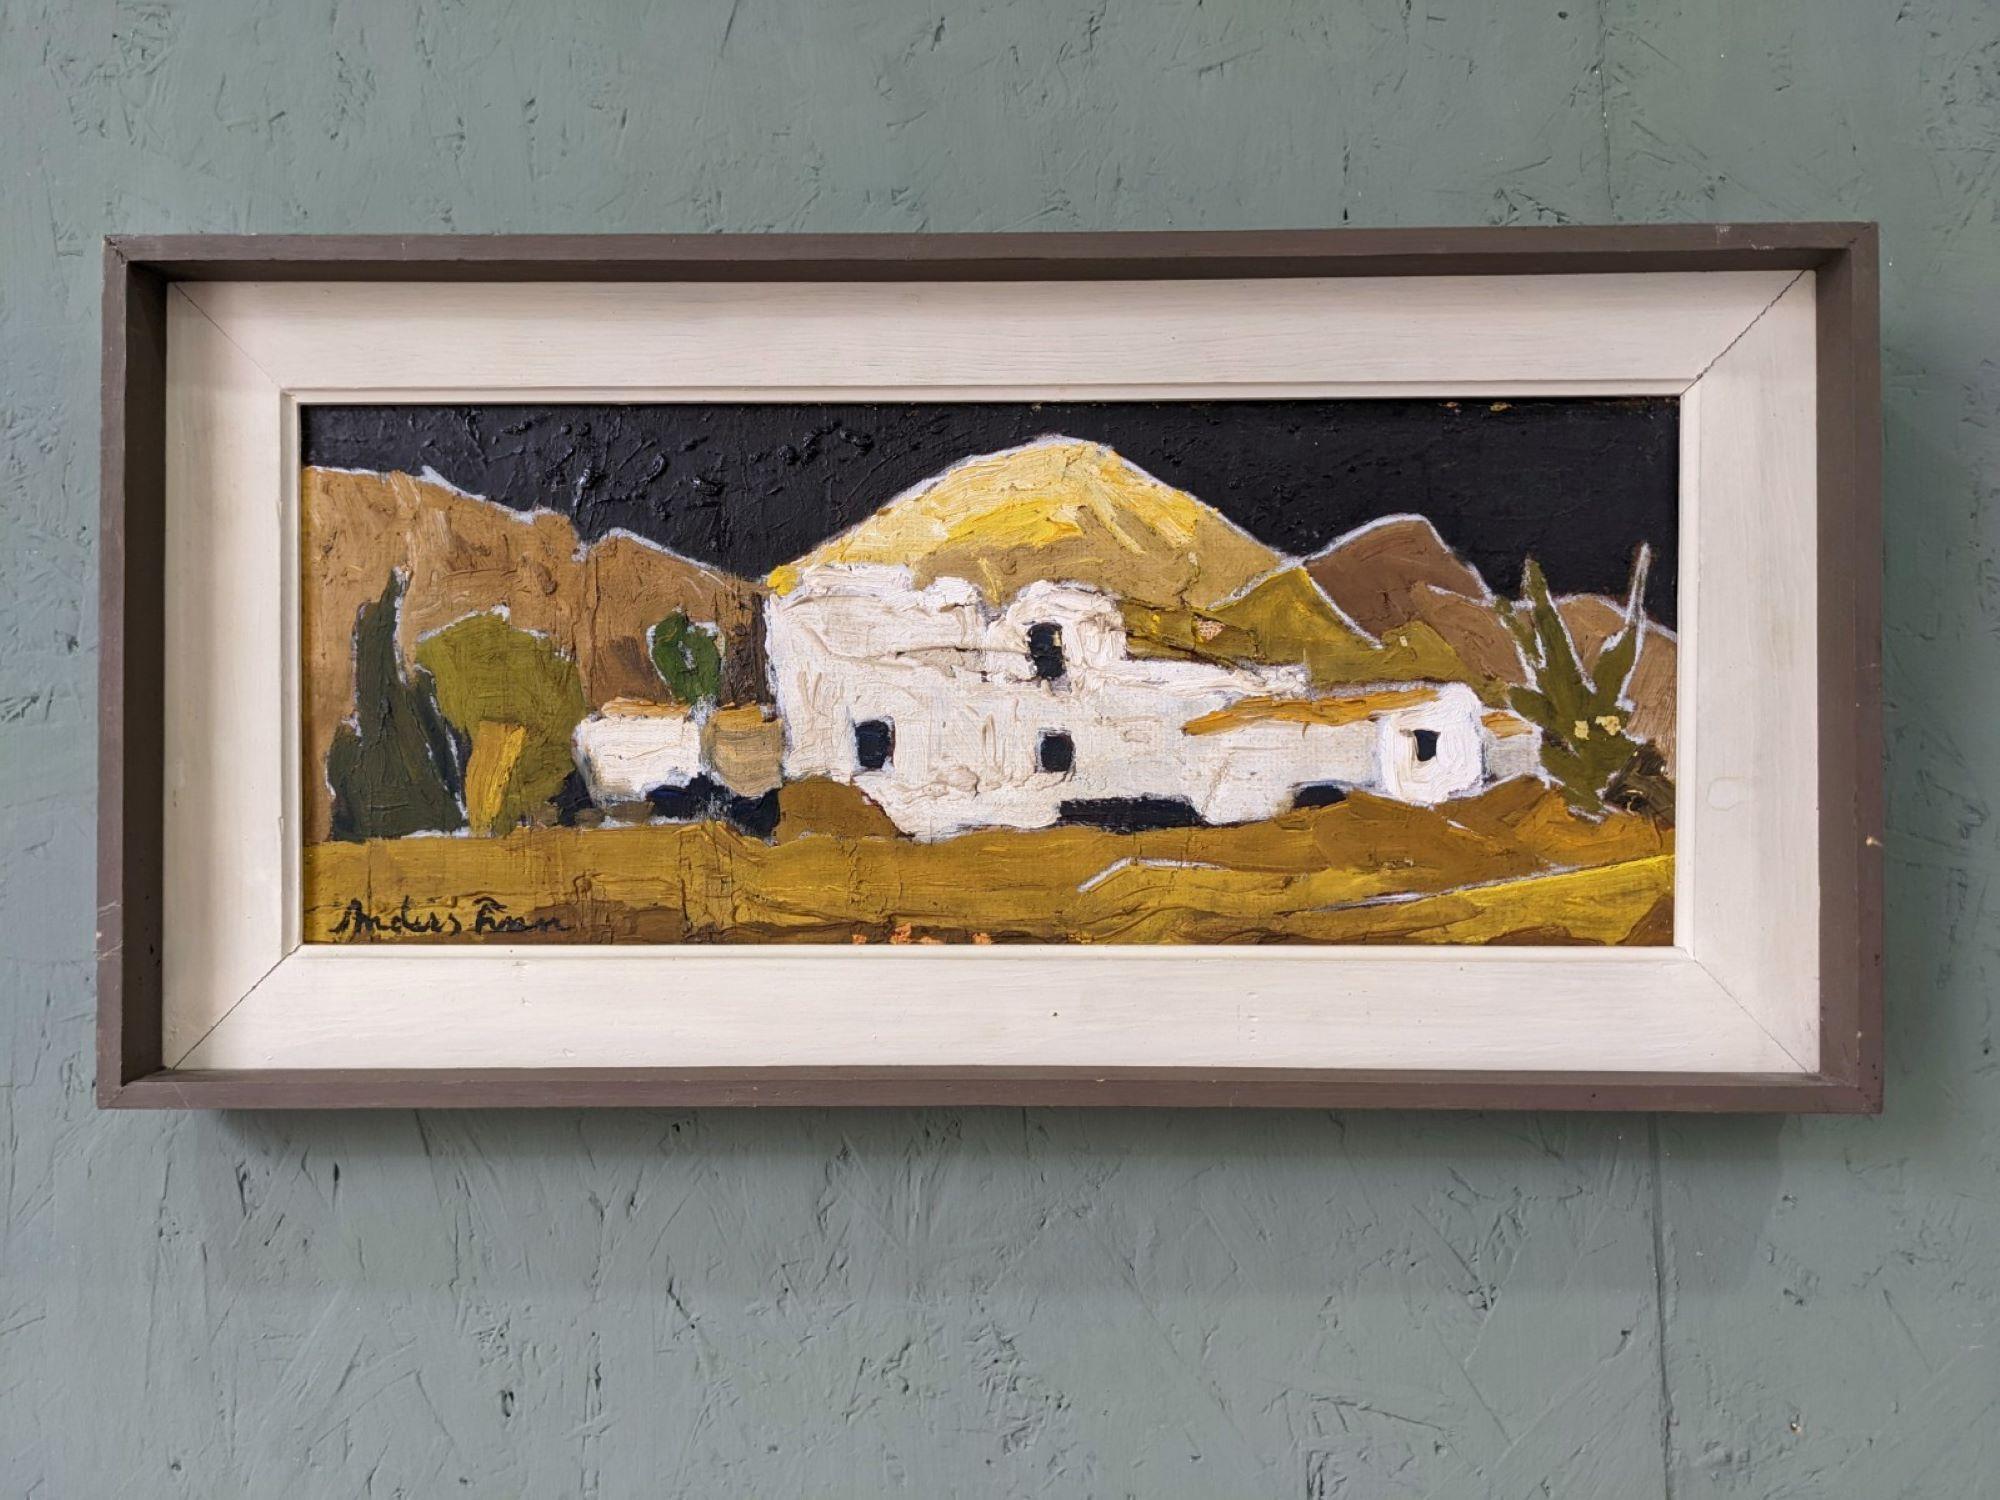 WHITE VILLAGE
Size: 25 x 50 cm (including frame)
Oil on board

A charming and expressive mid-century modernist townscape, executed in oil onto board.

The composition presents a night scene, where a white village is nestled amidst a rich brown